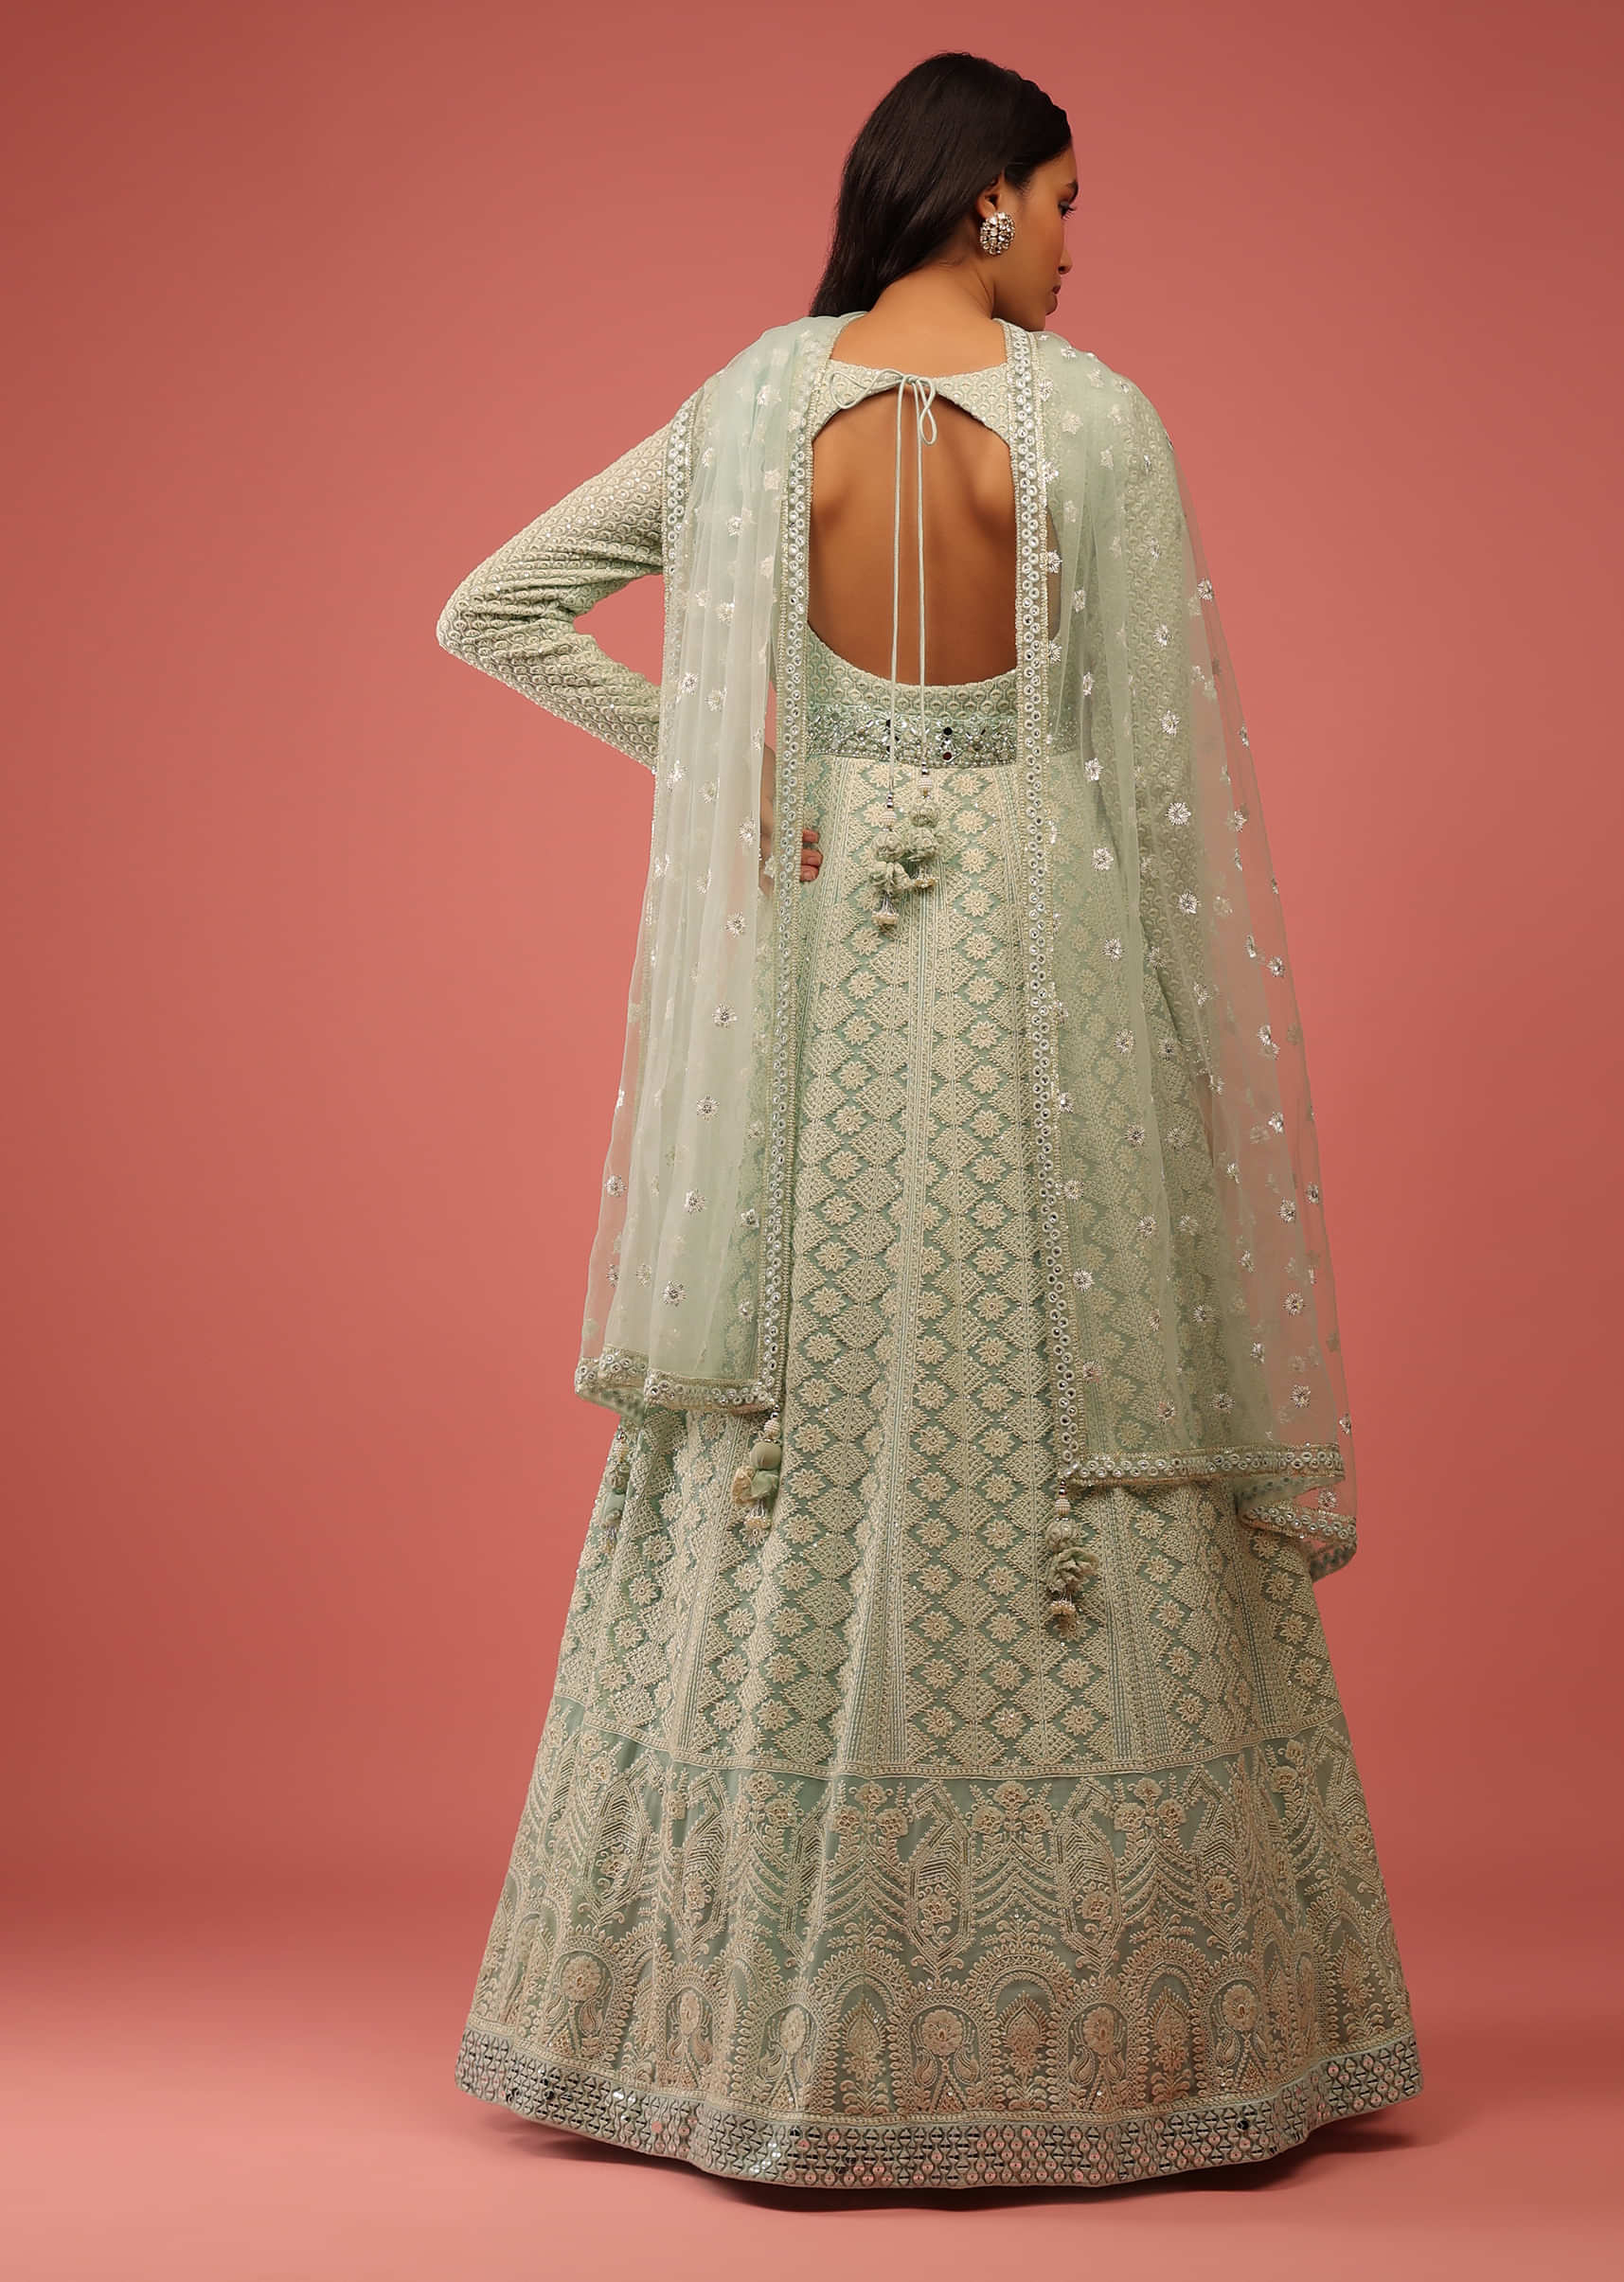 Powder Green Anarkali Suit In Georgette With Lucknowi Thread Embroidered Kalis And Mughal Border